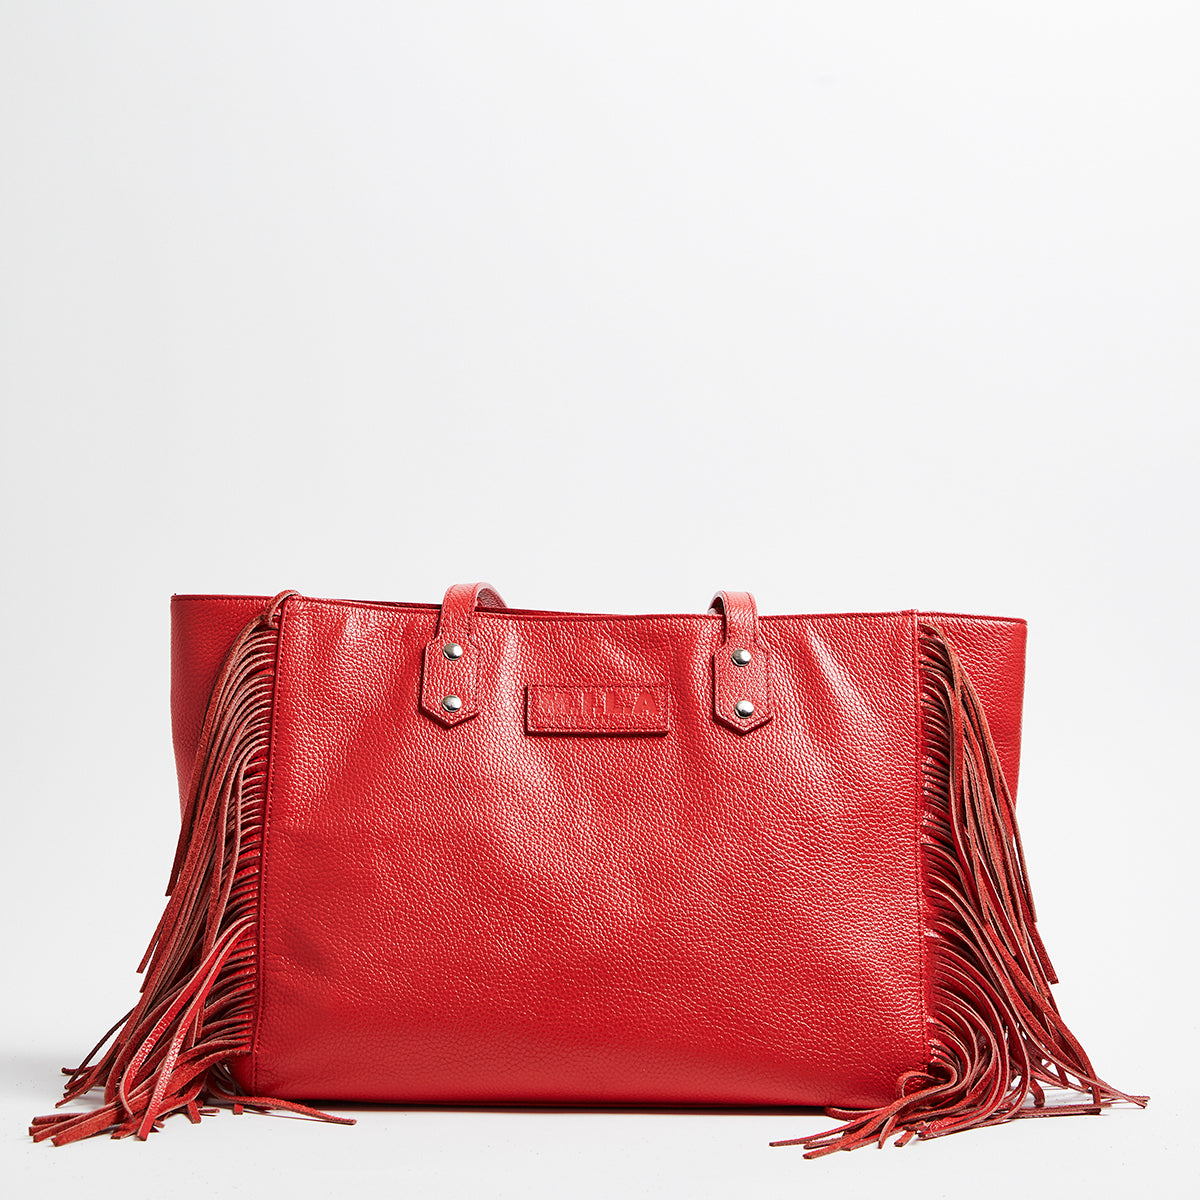 Cher Luxury Leather Fringe Bag - Red